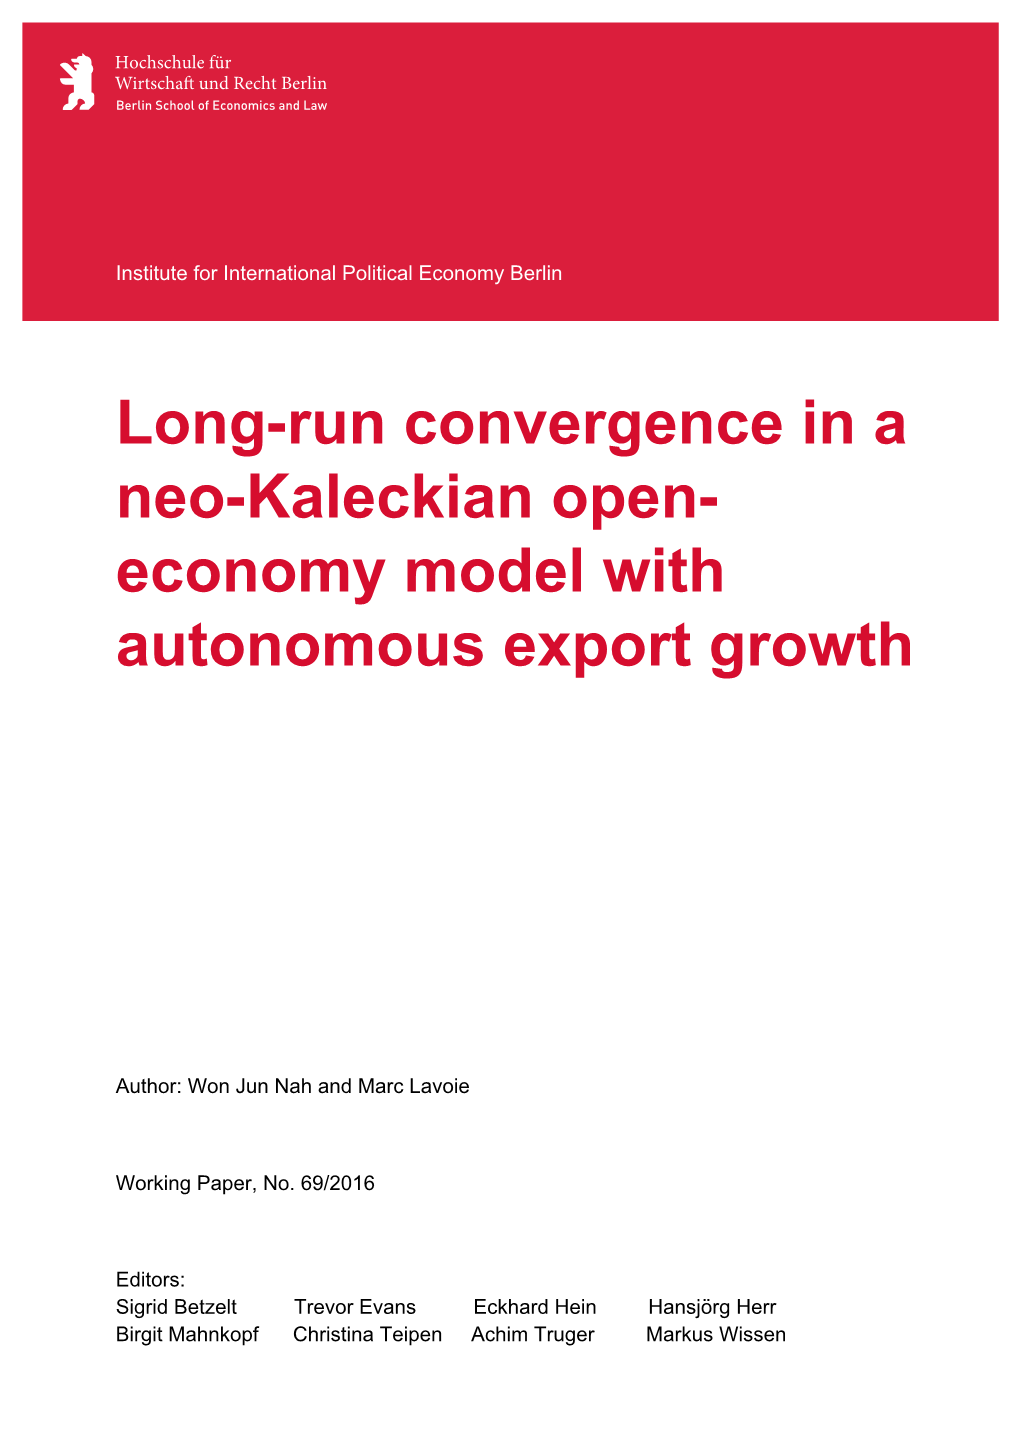 Long-Run Convergence in a Neo-Kaleckian Open- Economy Model with Autonomous Export Growth